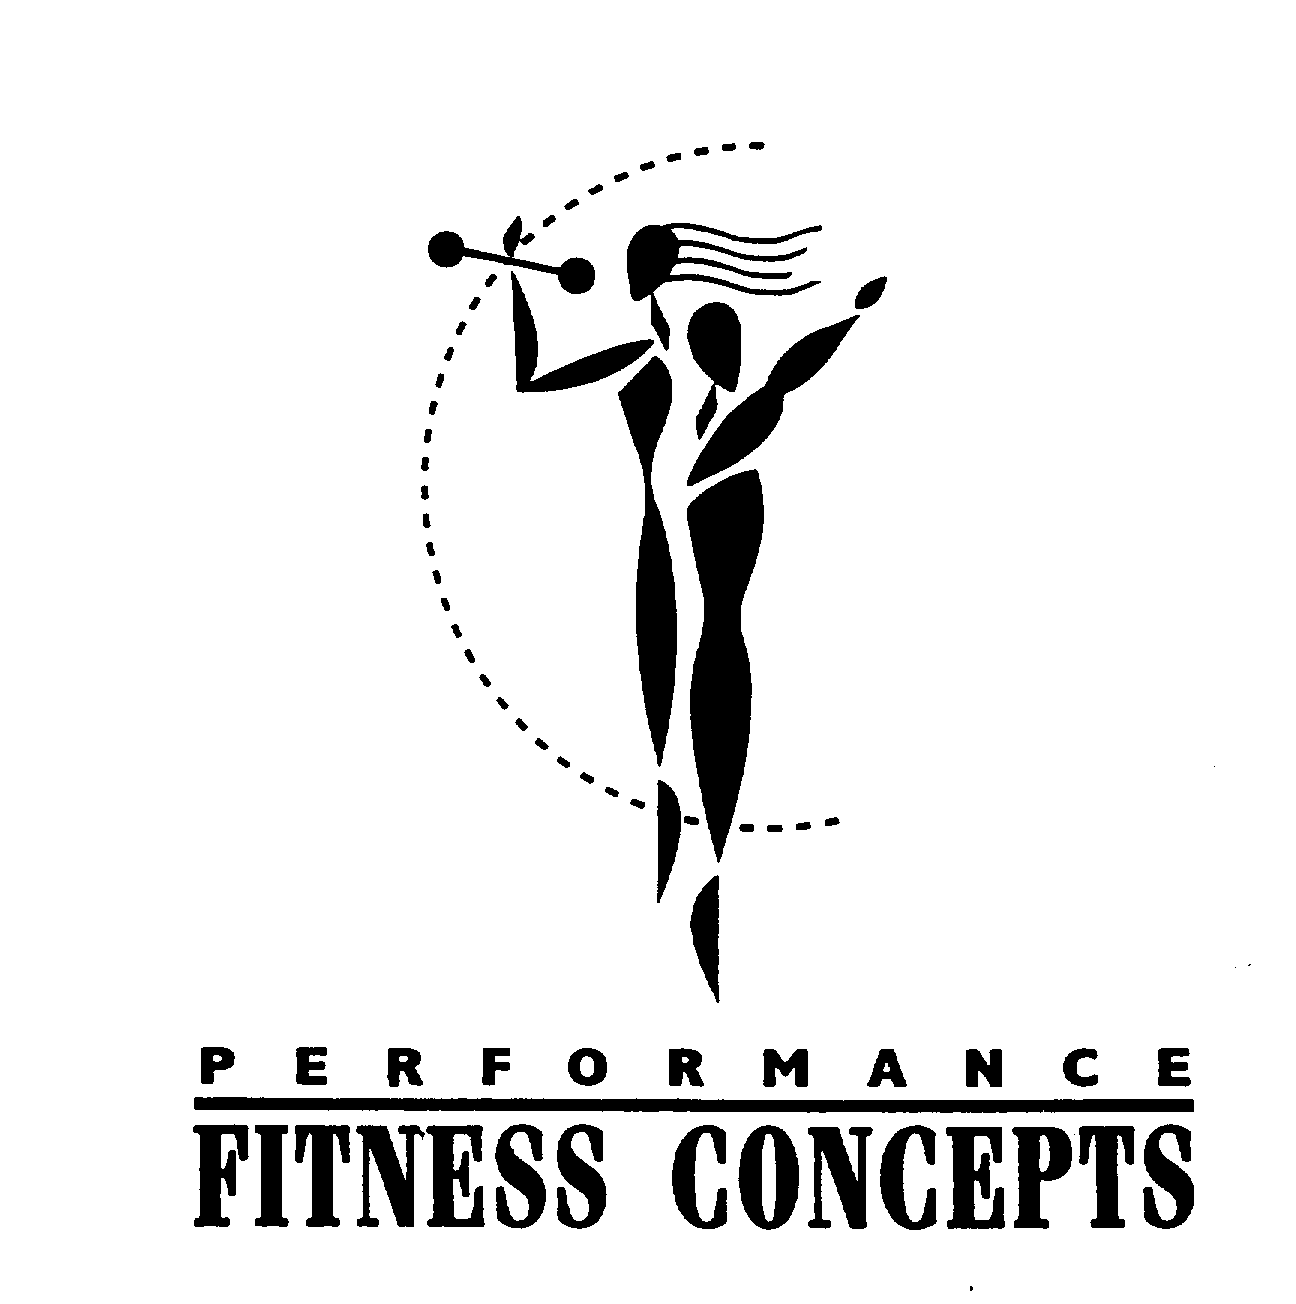  PERFORMANCE FITNESS CONCEPTS